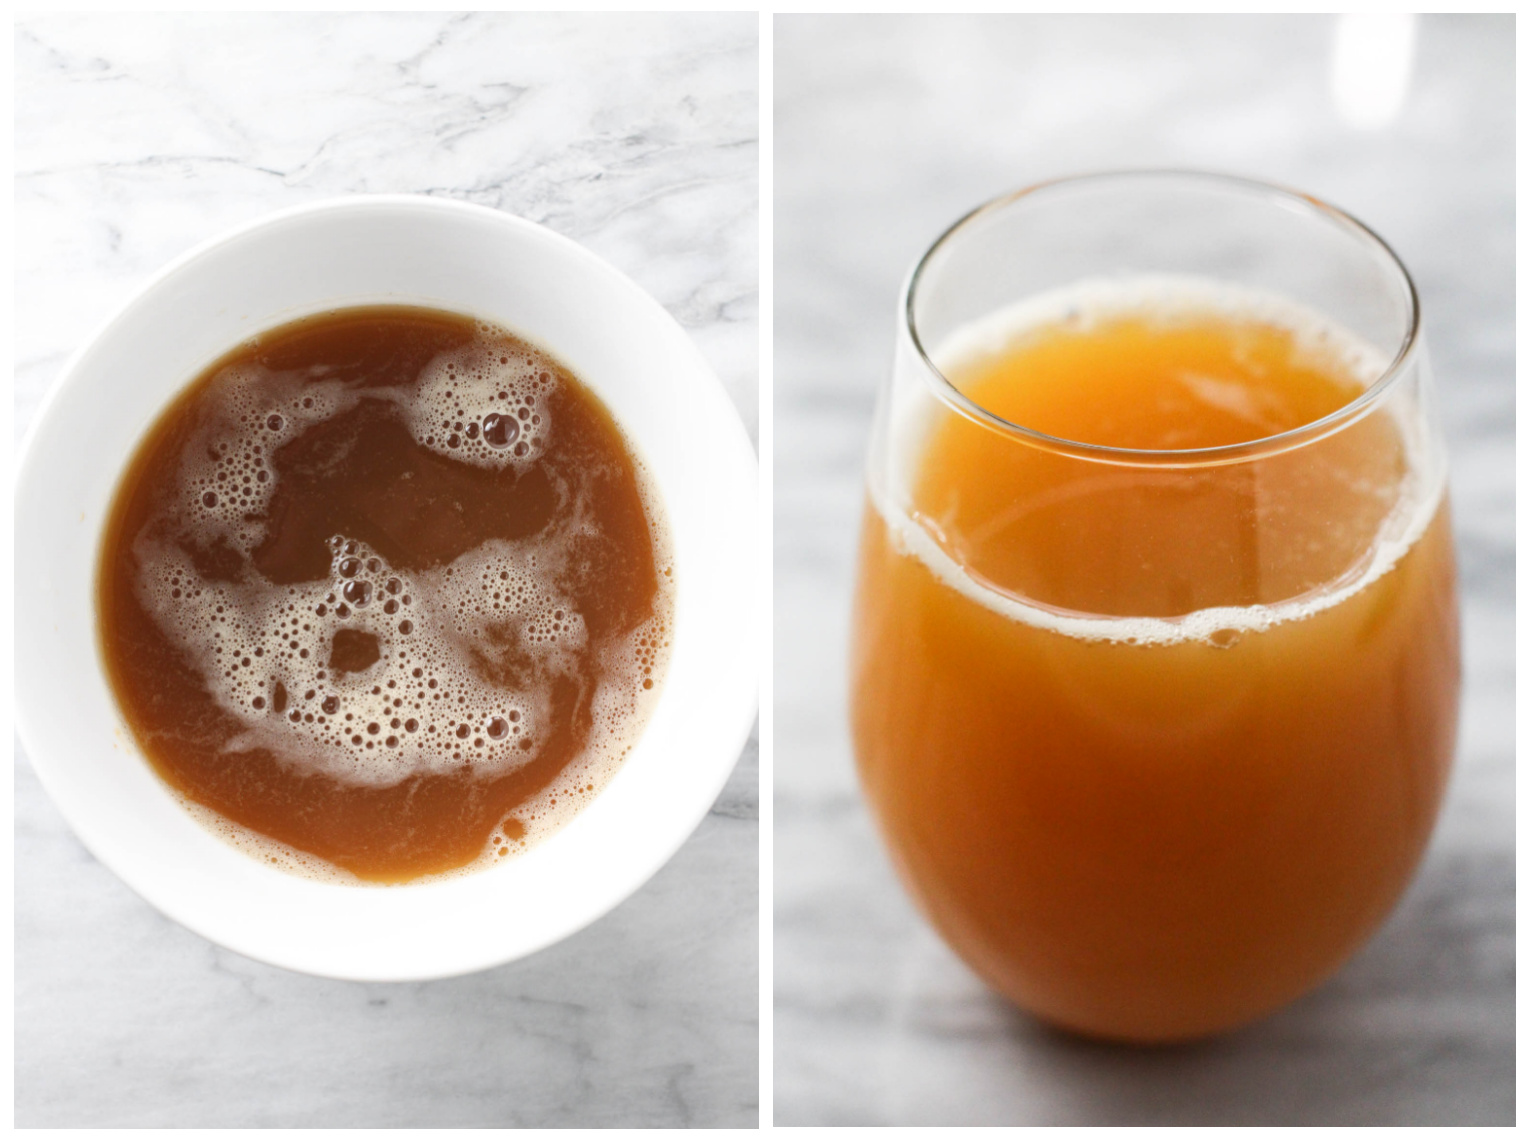 Collage of two images side-by-side. On the left, overhead shot of apple juice in a bowl. On the right, image of apple juice in a glass.